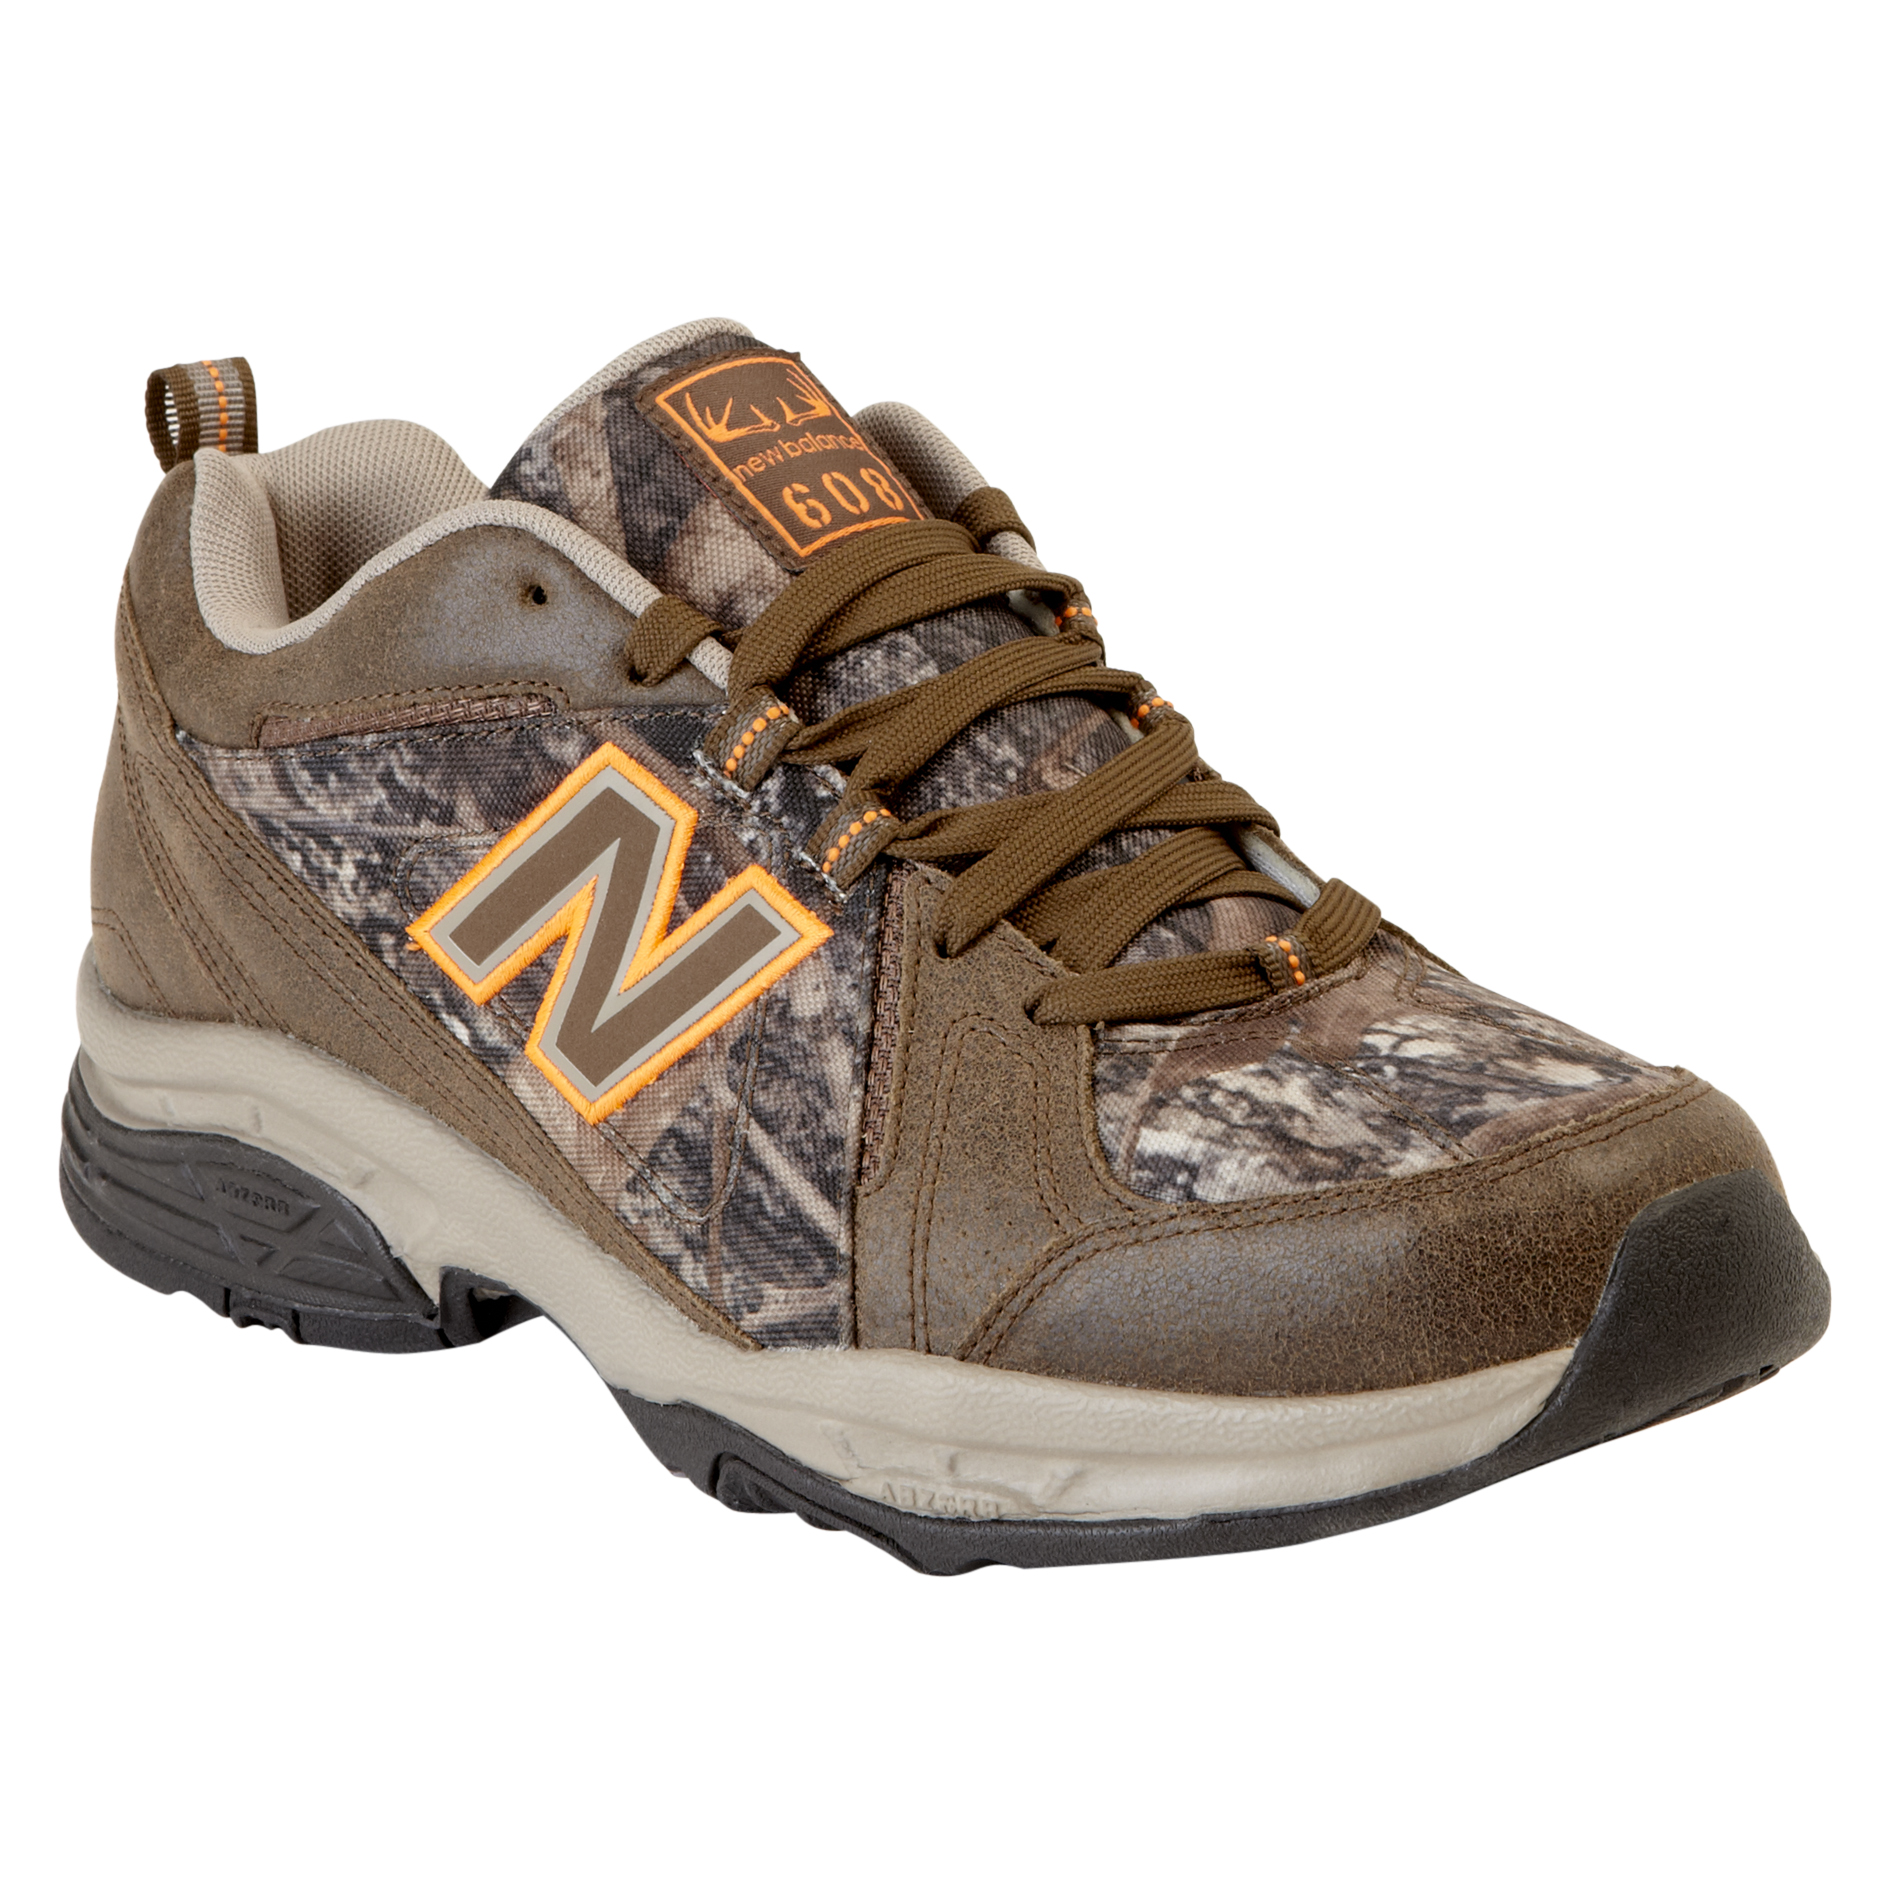 New Balance Men's 608 Camouflage/Brown Athletic Shoes